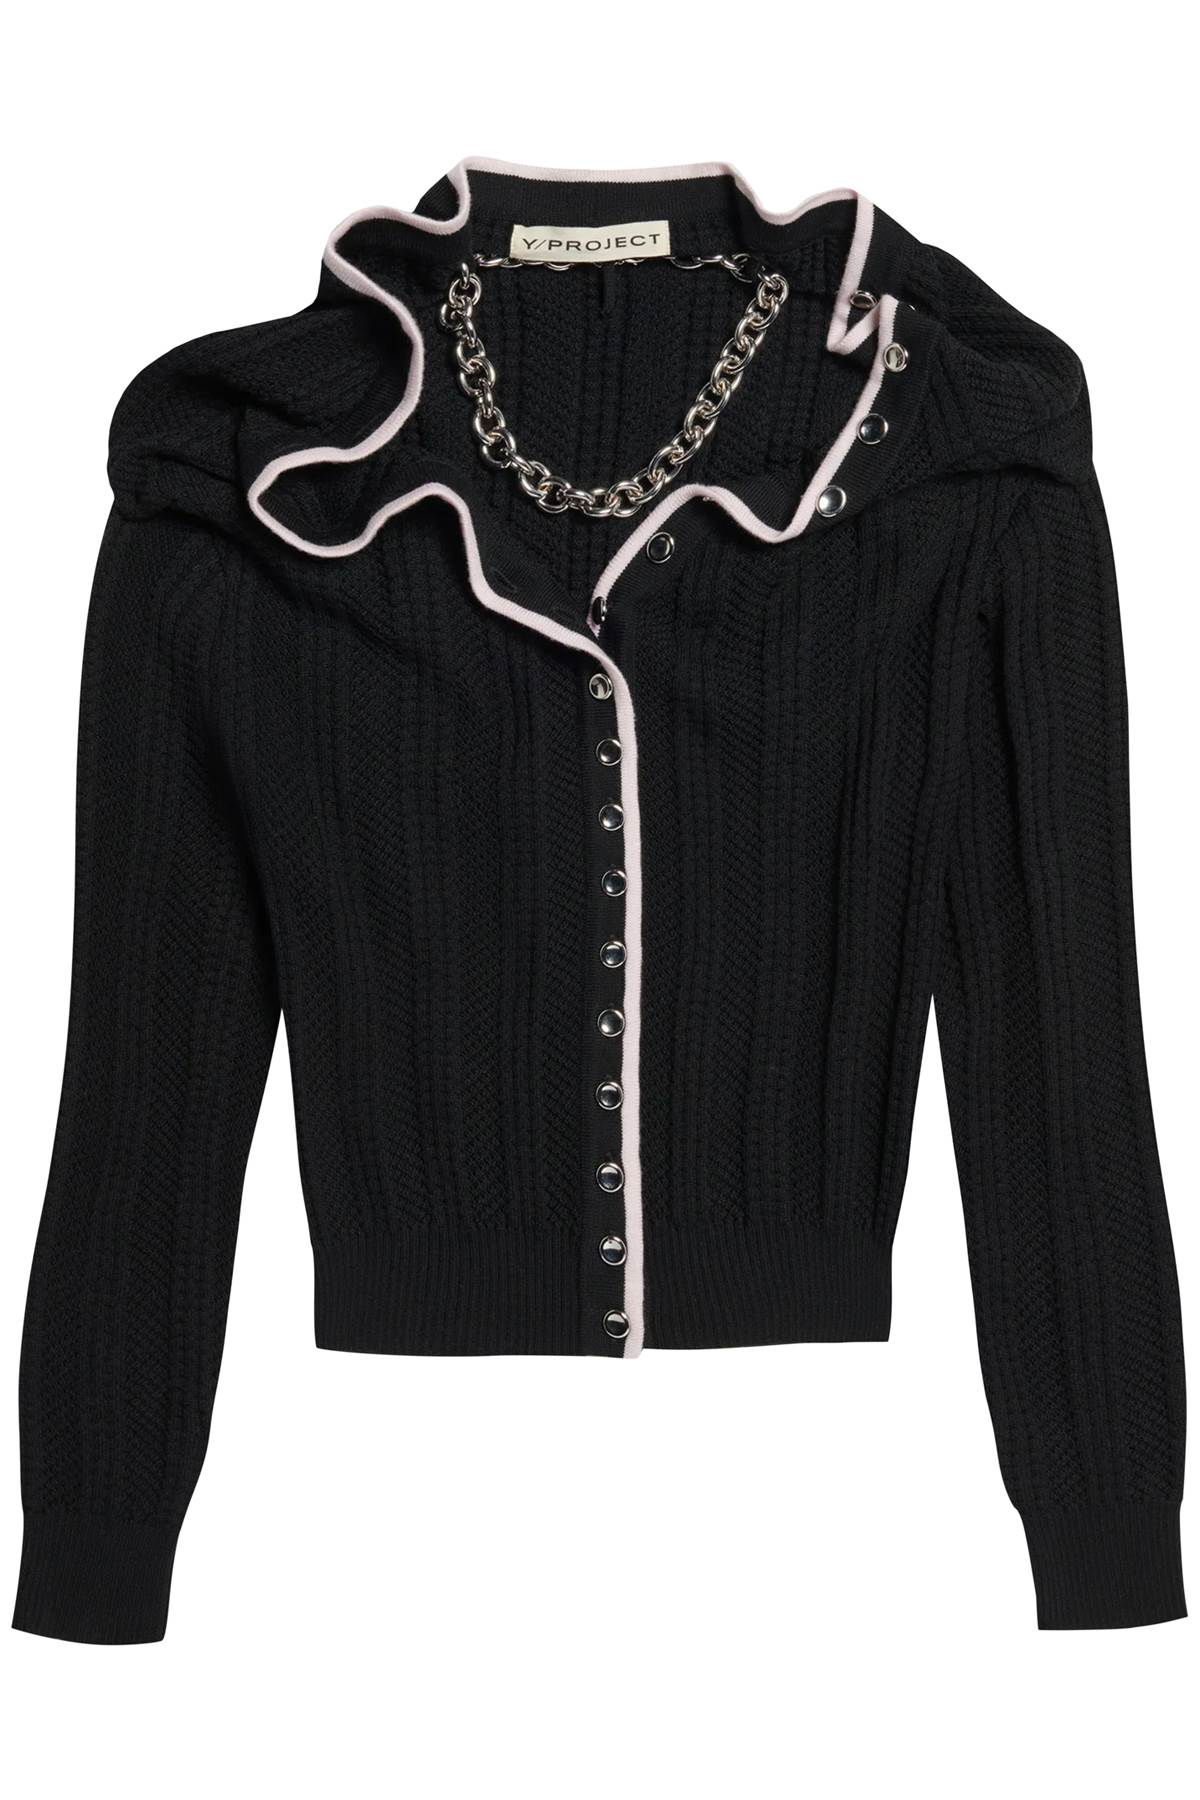 Y Project Merino Wool Cardigan With Necklace - L Nero